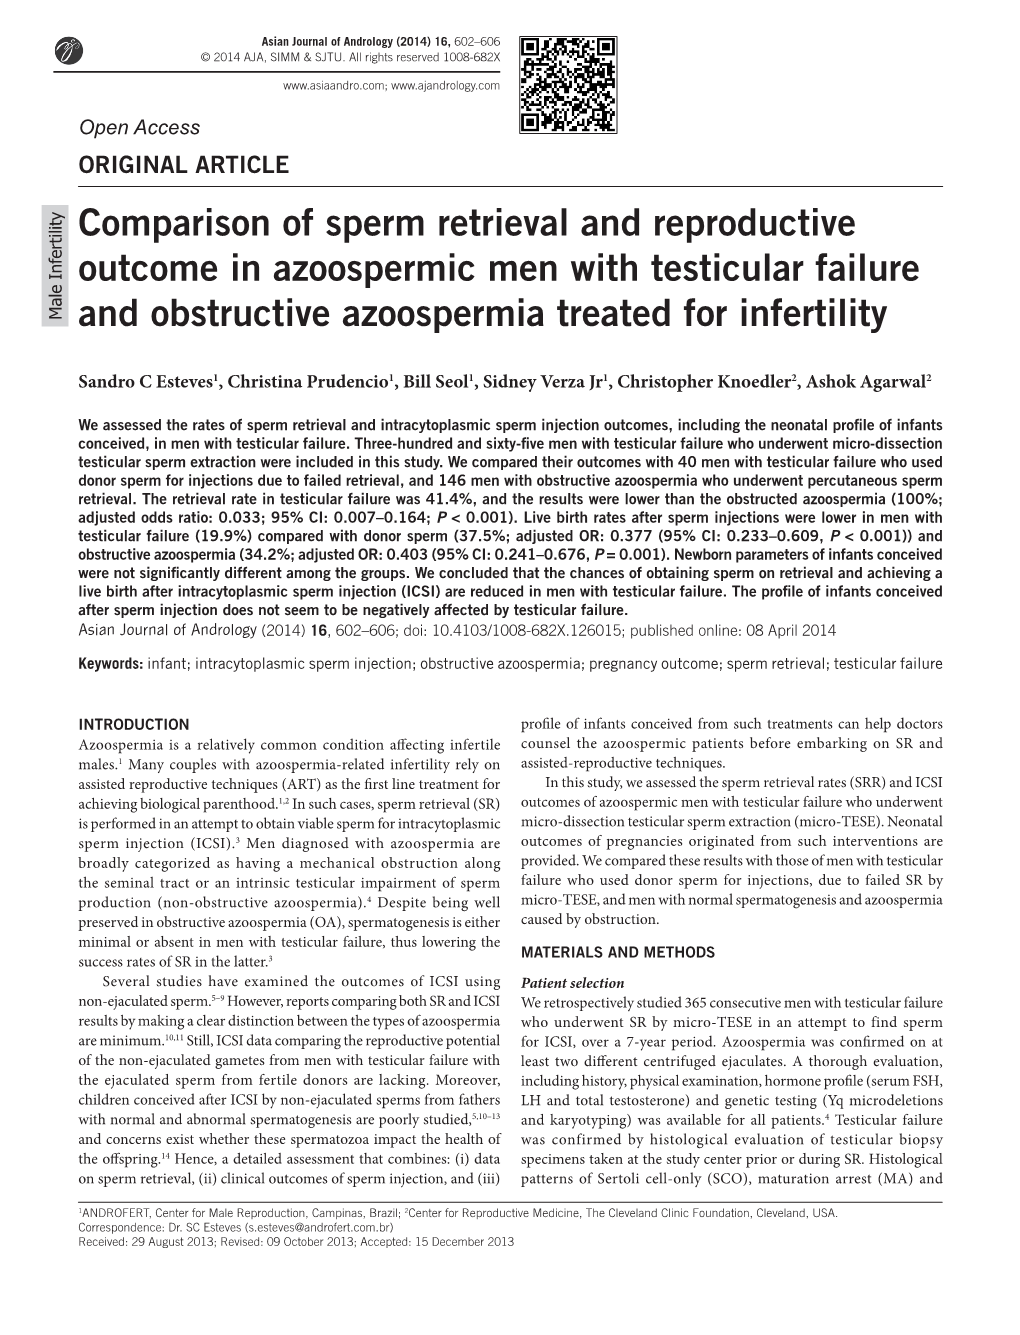 Comparison of Sperm Retrieval and Reproductive Outcome in Azoospermic Men with Testicular Failure